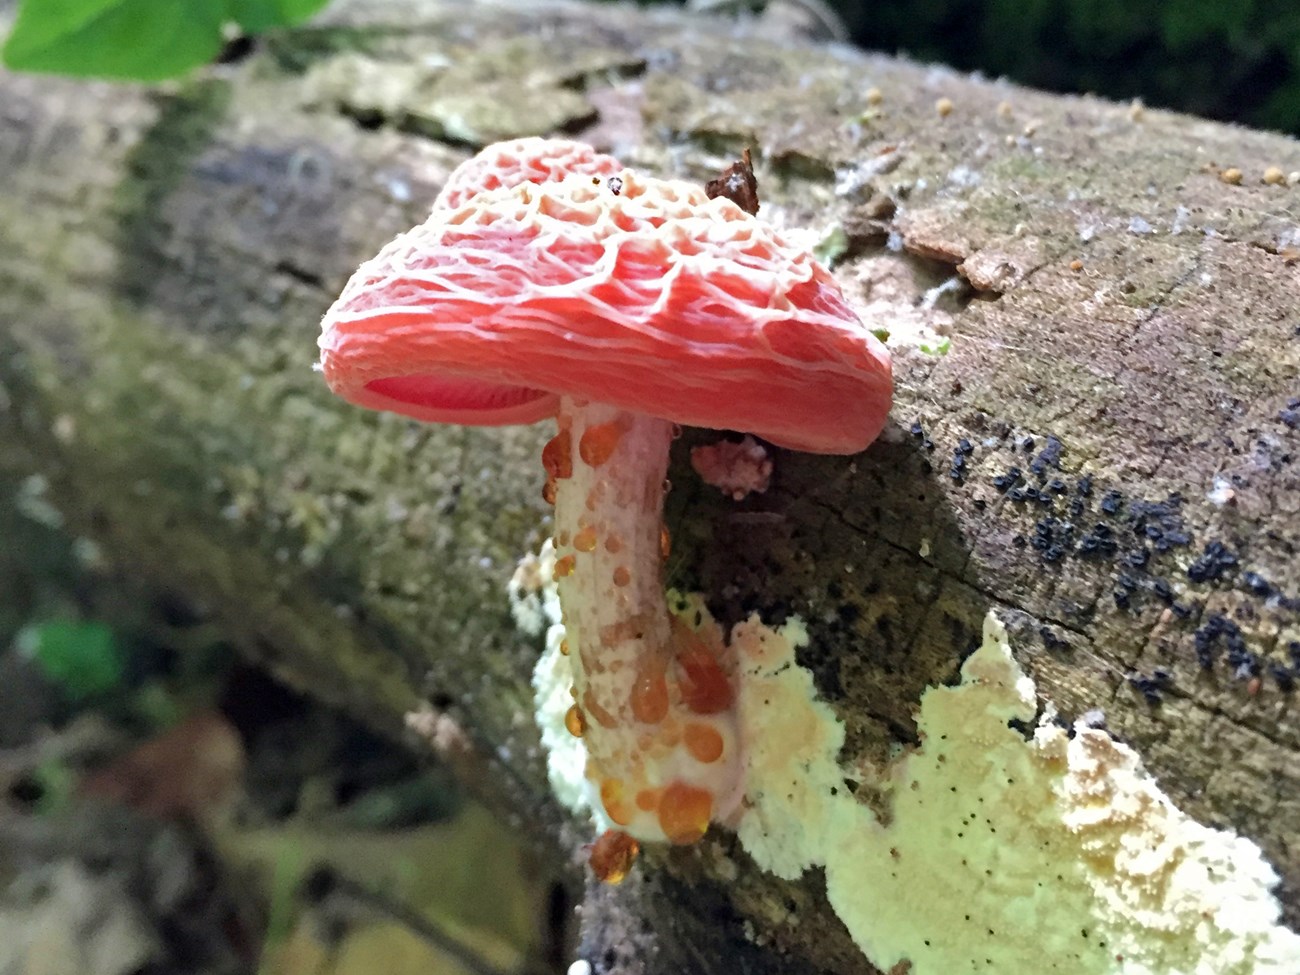 Mushroom with a wrinkly bright pink cap and drops of orange liquid oozing from its stem